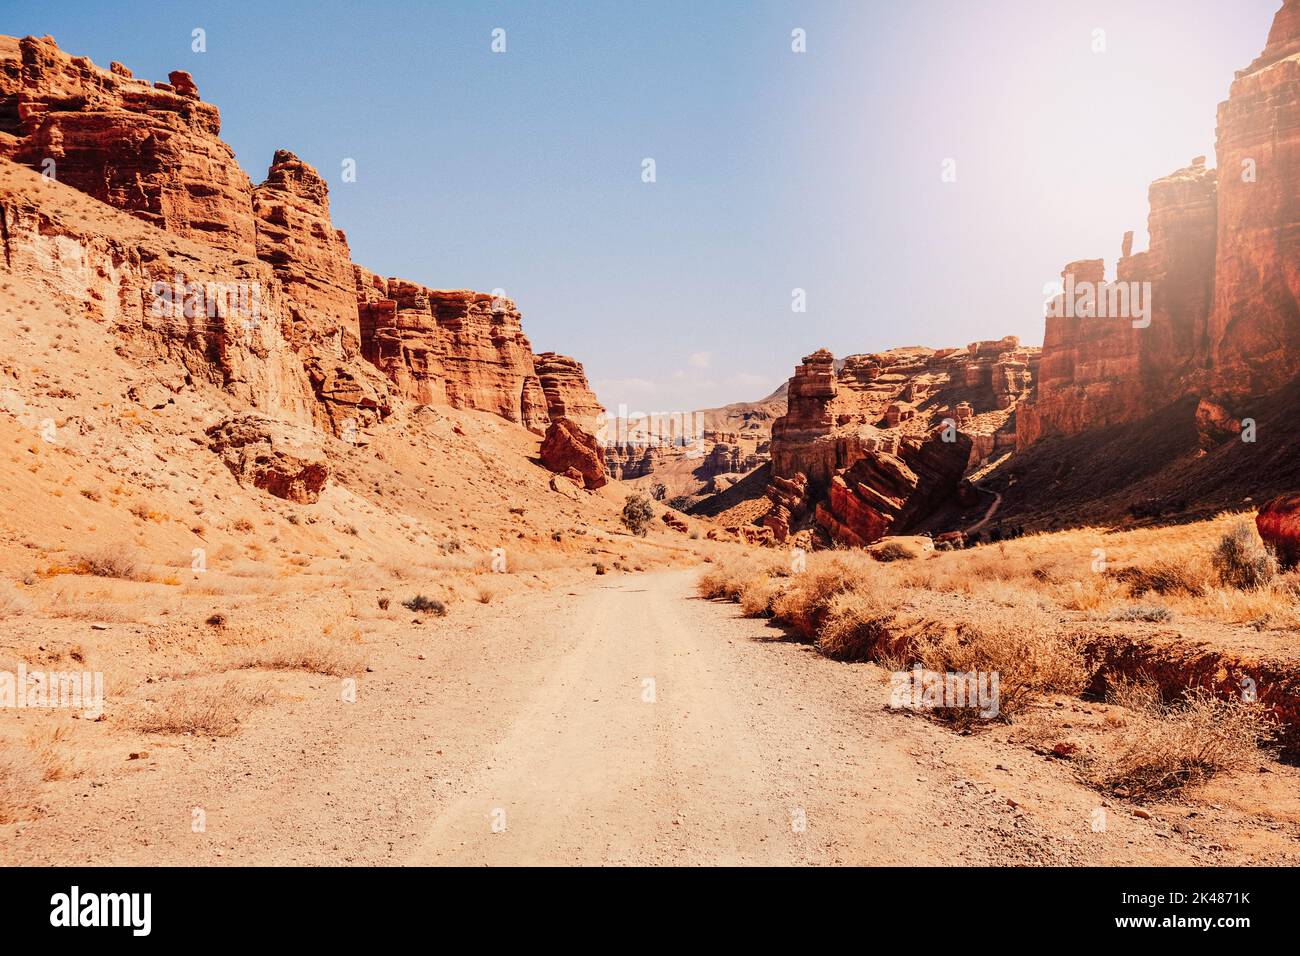 Panoramic view of Charyn Canyon in Kazakhstan near Almaty during sunrise Stock Photo